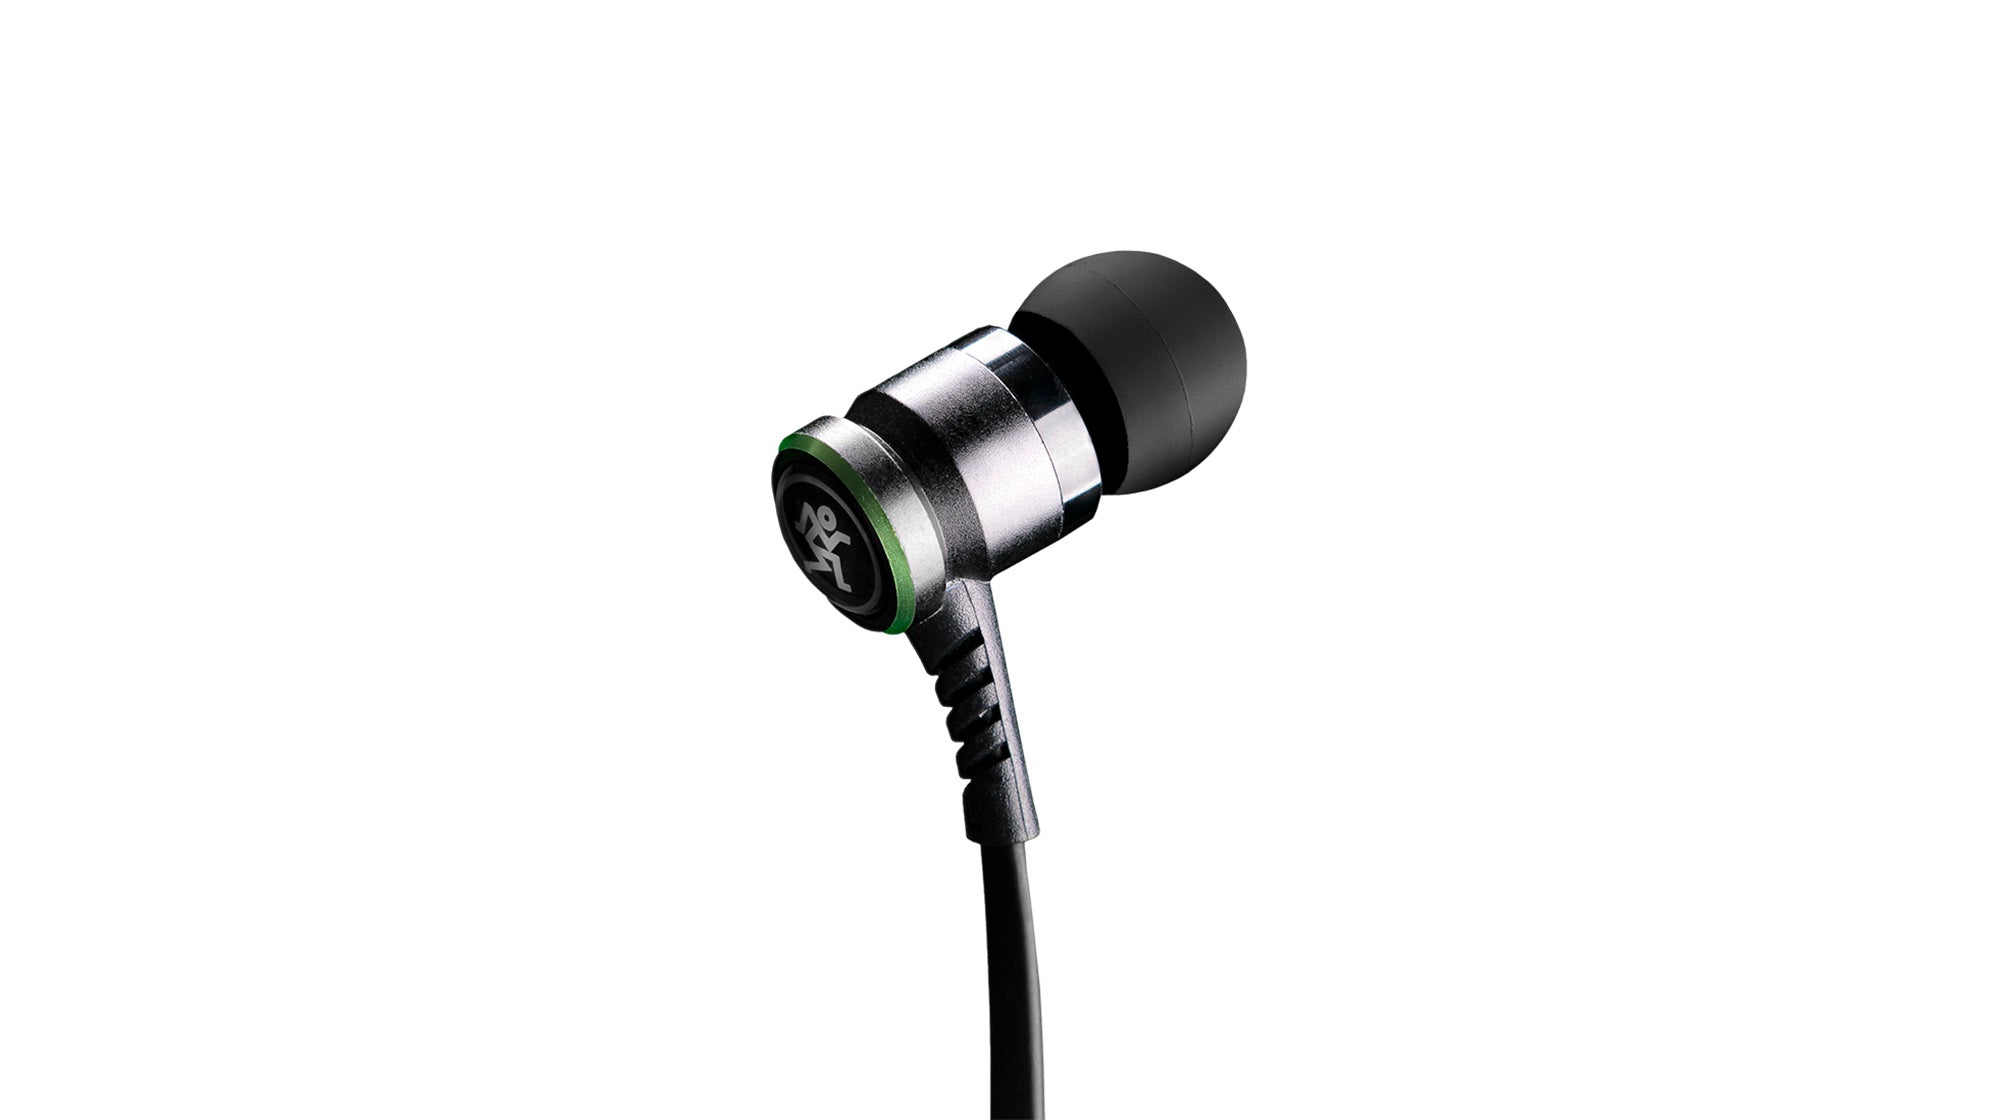 Mackie CR-BUDS High Performance Earphones with Mic and Control Mackie